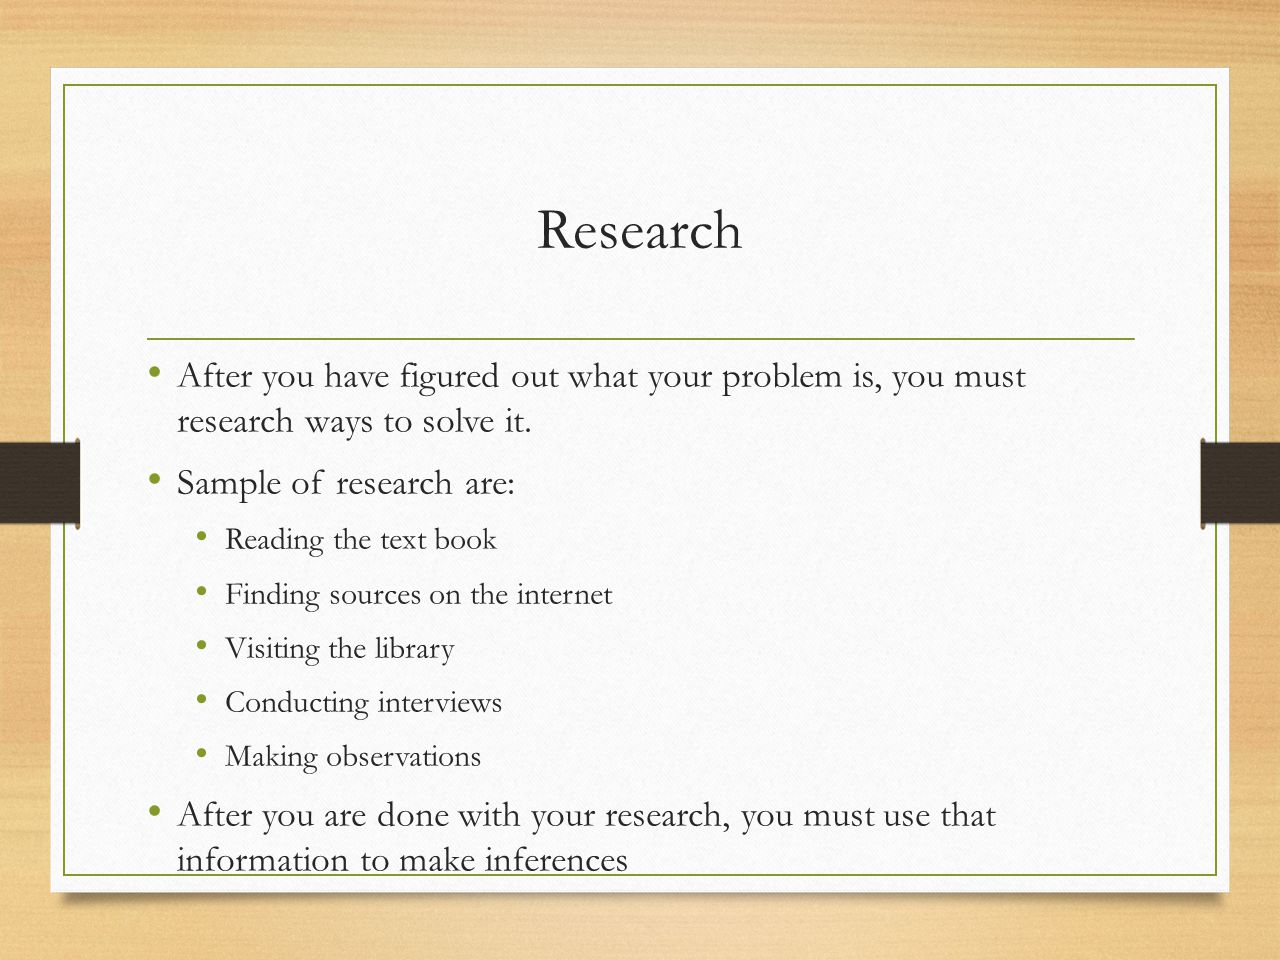 Research After you have figured out what your problem is, you must research ways to solve it. Sample of research are: